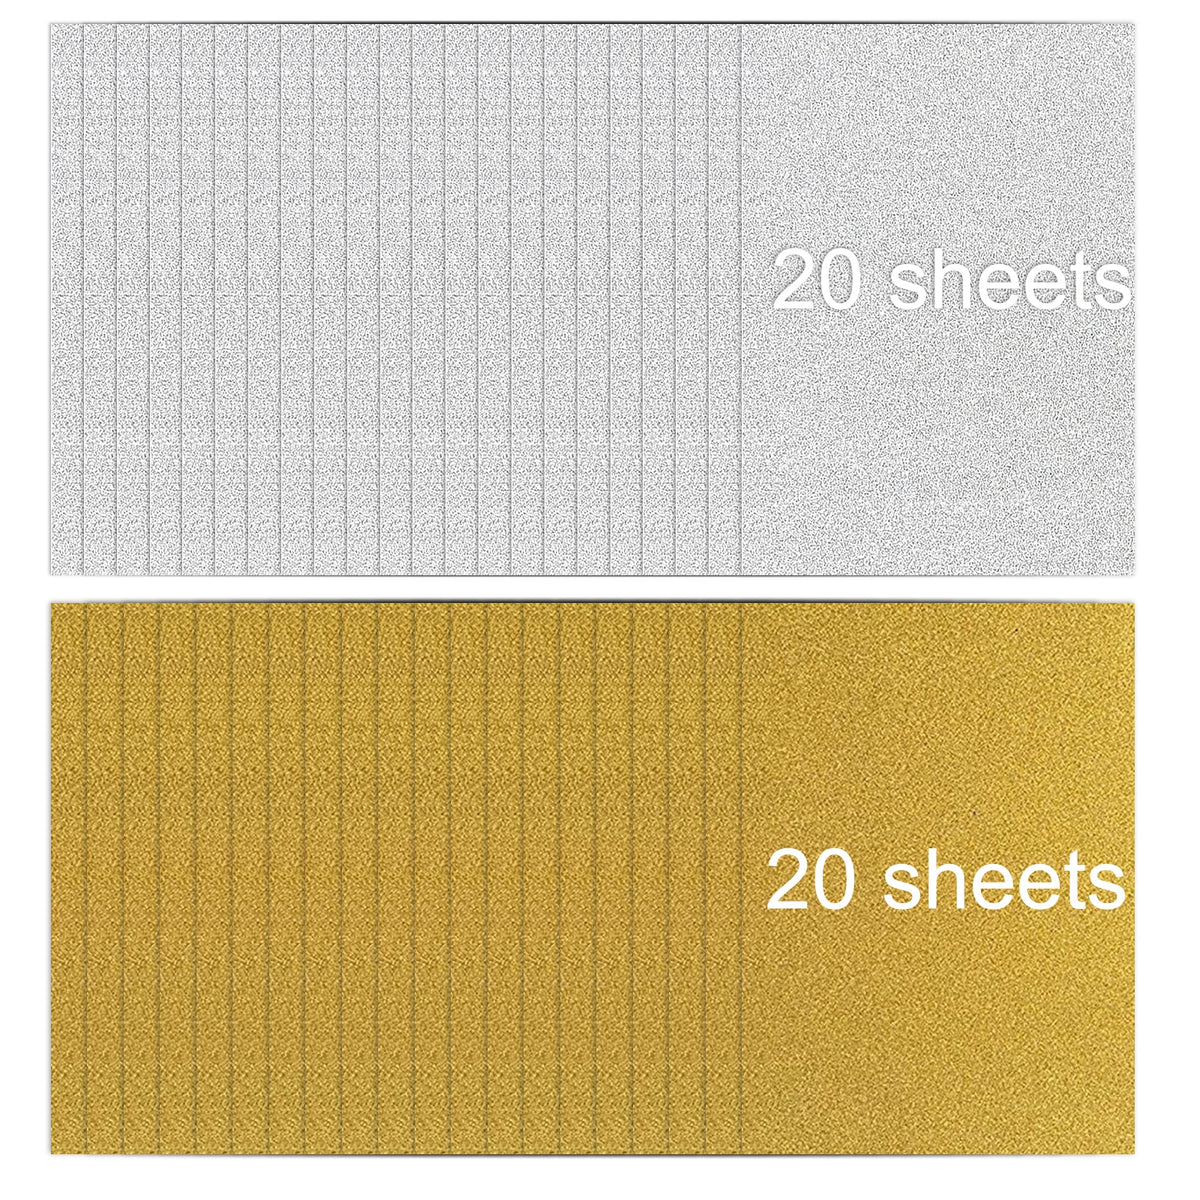 40 Sheets Gold and Silver Glitter Cardstock Paper A4 Self Adhesive for DIY Crafts